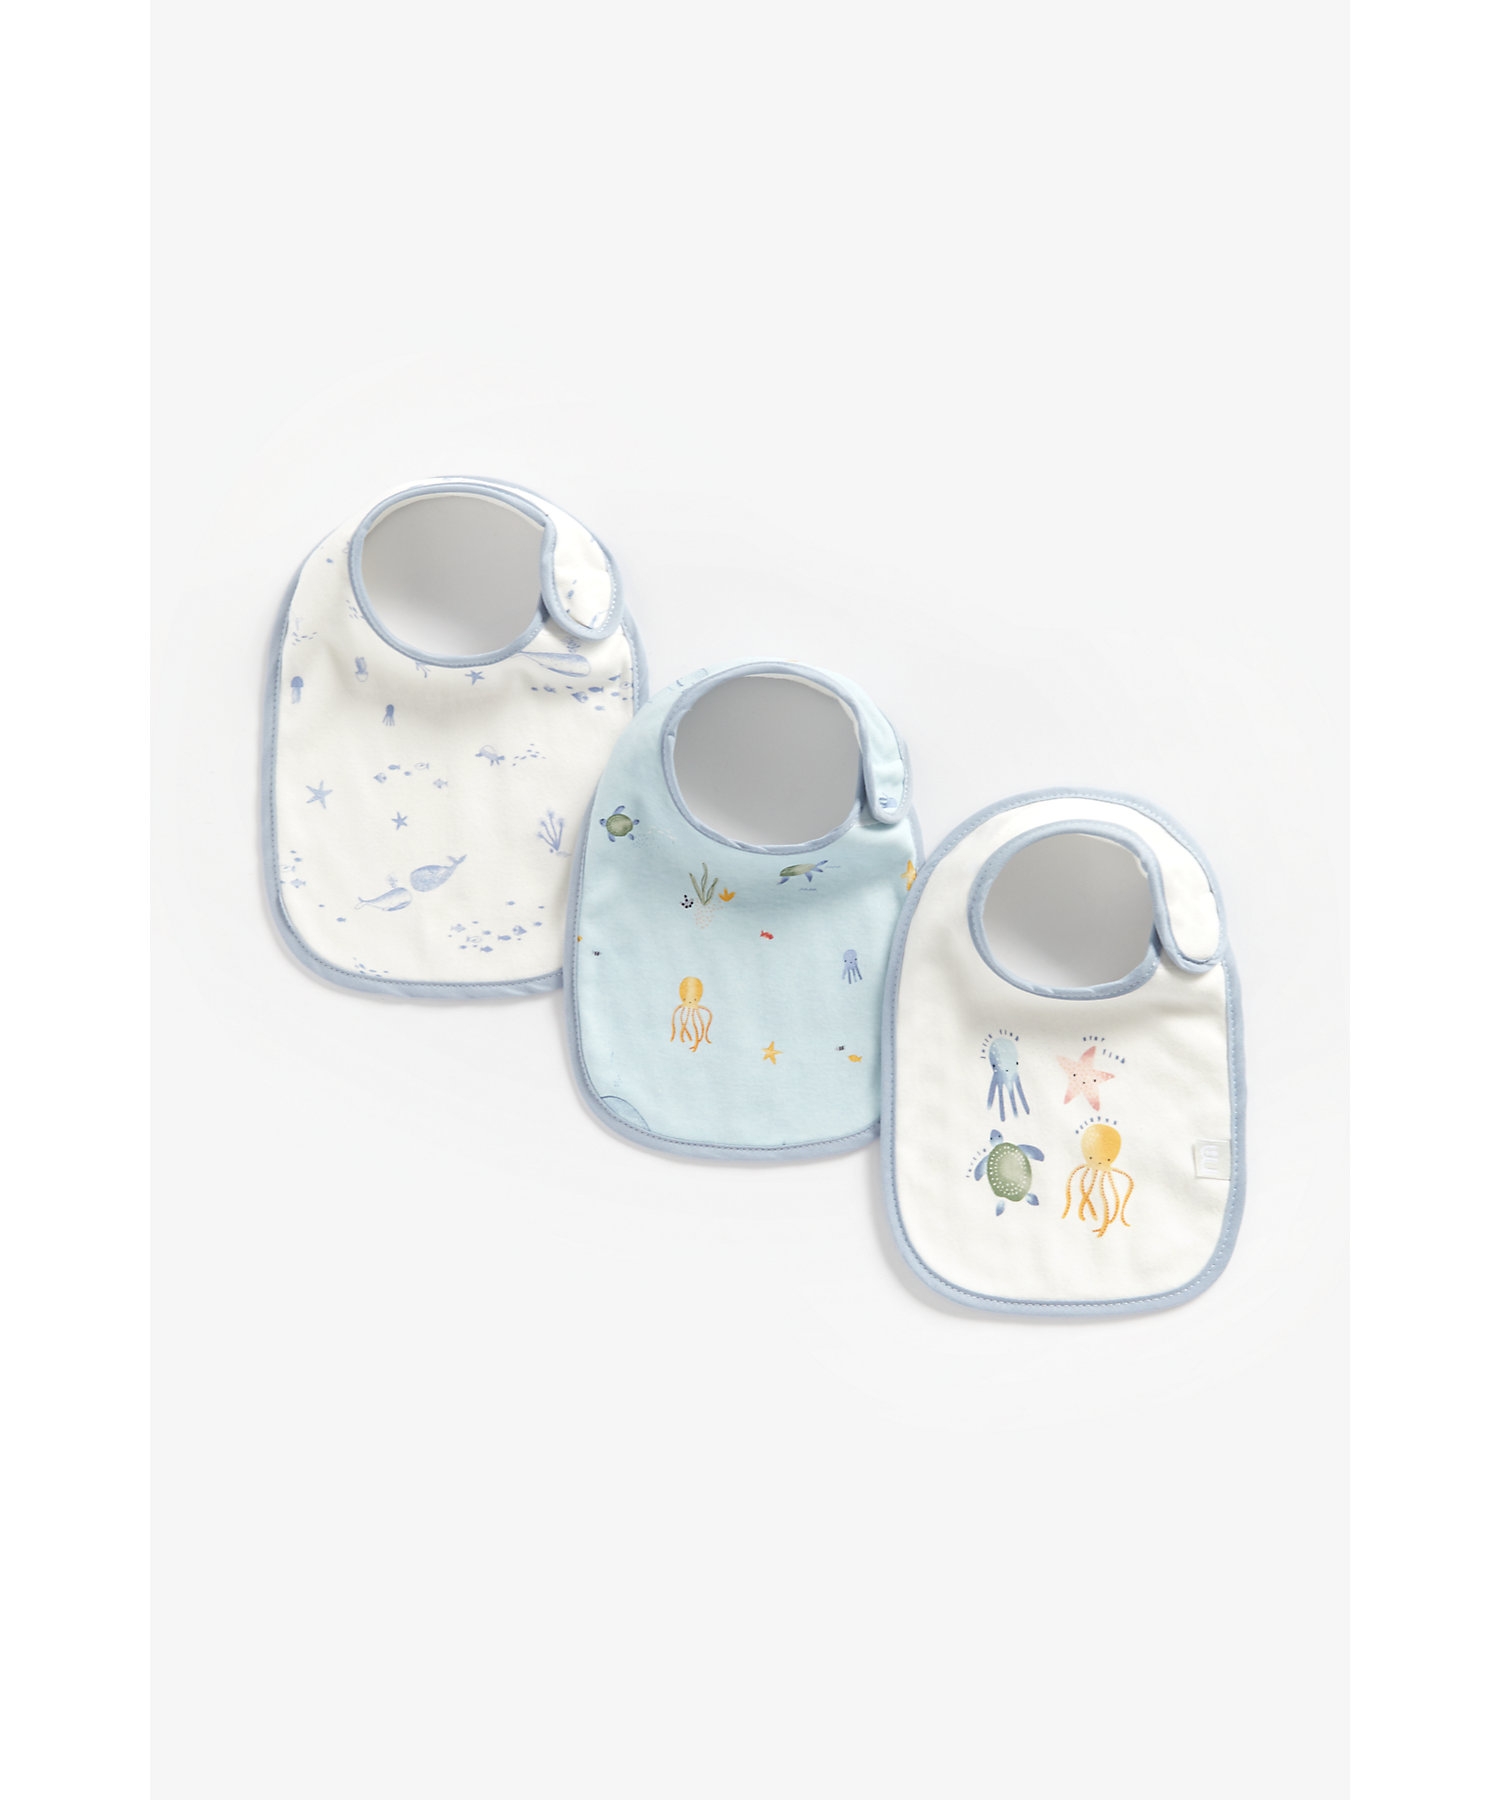 Mothercare | Mothercare You Me & The Sea Bibs Pack of 3 White